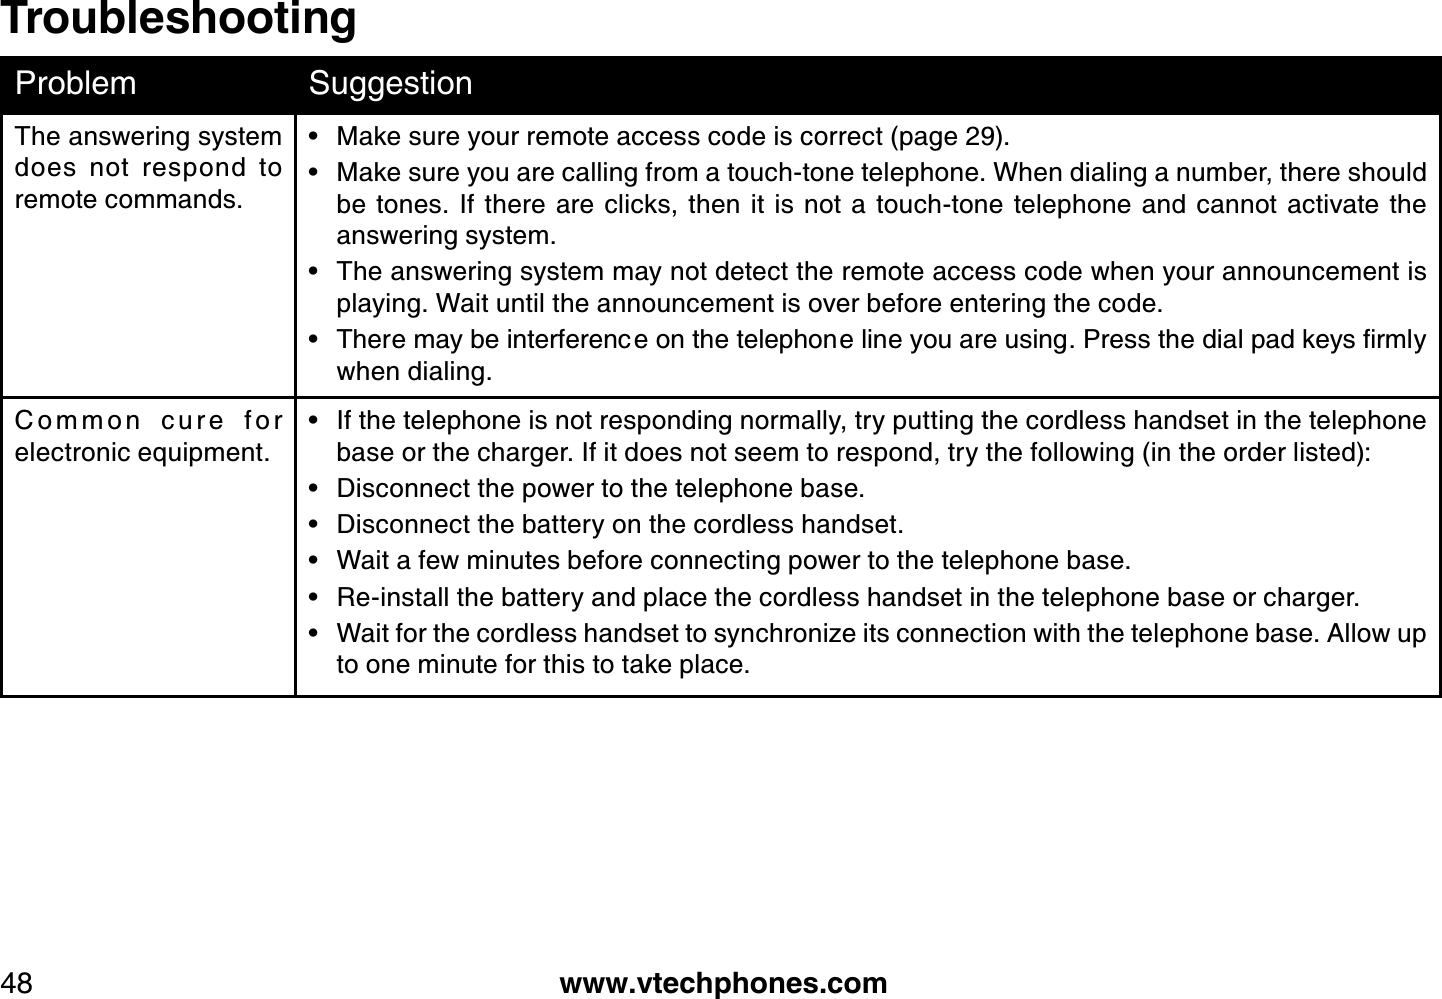 www.vtechphones.com48TroubleshootingProblem SuggestionThe answering system does  not  respond  to remote commands.Make sure your remote access code is correct (page 29).Make sure you are calling from a touch-tone telephone. When dialing a number, there should be  tones.  If  there are  clicks,  then  it  is  not a touch-tone  telephone  and  cannot activate the answering system.The answering system may not detect the remote access code when your announcement is playing. Wait until the announcement is over before entering the code.6JGTGOC[DGKPVGTHGTGPEGQPVJGVGNGRJQPGNKPG[QWCTGWUKPI2TGUUVJGFKCNRCFMG[UſTON[when dialing.••••C o m m o n   c u r e   f o r electronic equipment.If the telephone is not responding normally, try putting the cordless handset in the telephone base or the charger. If it does not seem to respond, try the following (in the order listed):Disconnect the power to the telephone base.Disconnect the battery on the cordless handset.Wait a few minutes before connecting power to the telephone base.Re-install the battery and place the cordless handset in the telephone base or charger.Wait for the cordless handset to synchronize its connection with the telephone base. Allow up to one minute for this to take place.••••••